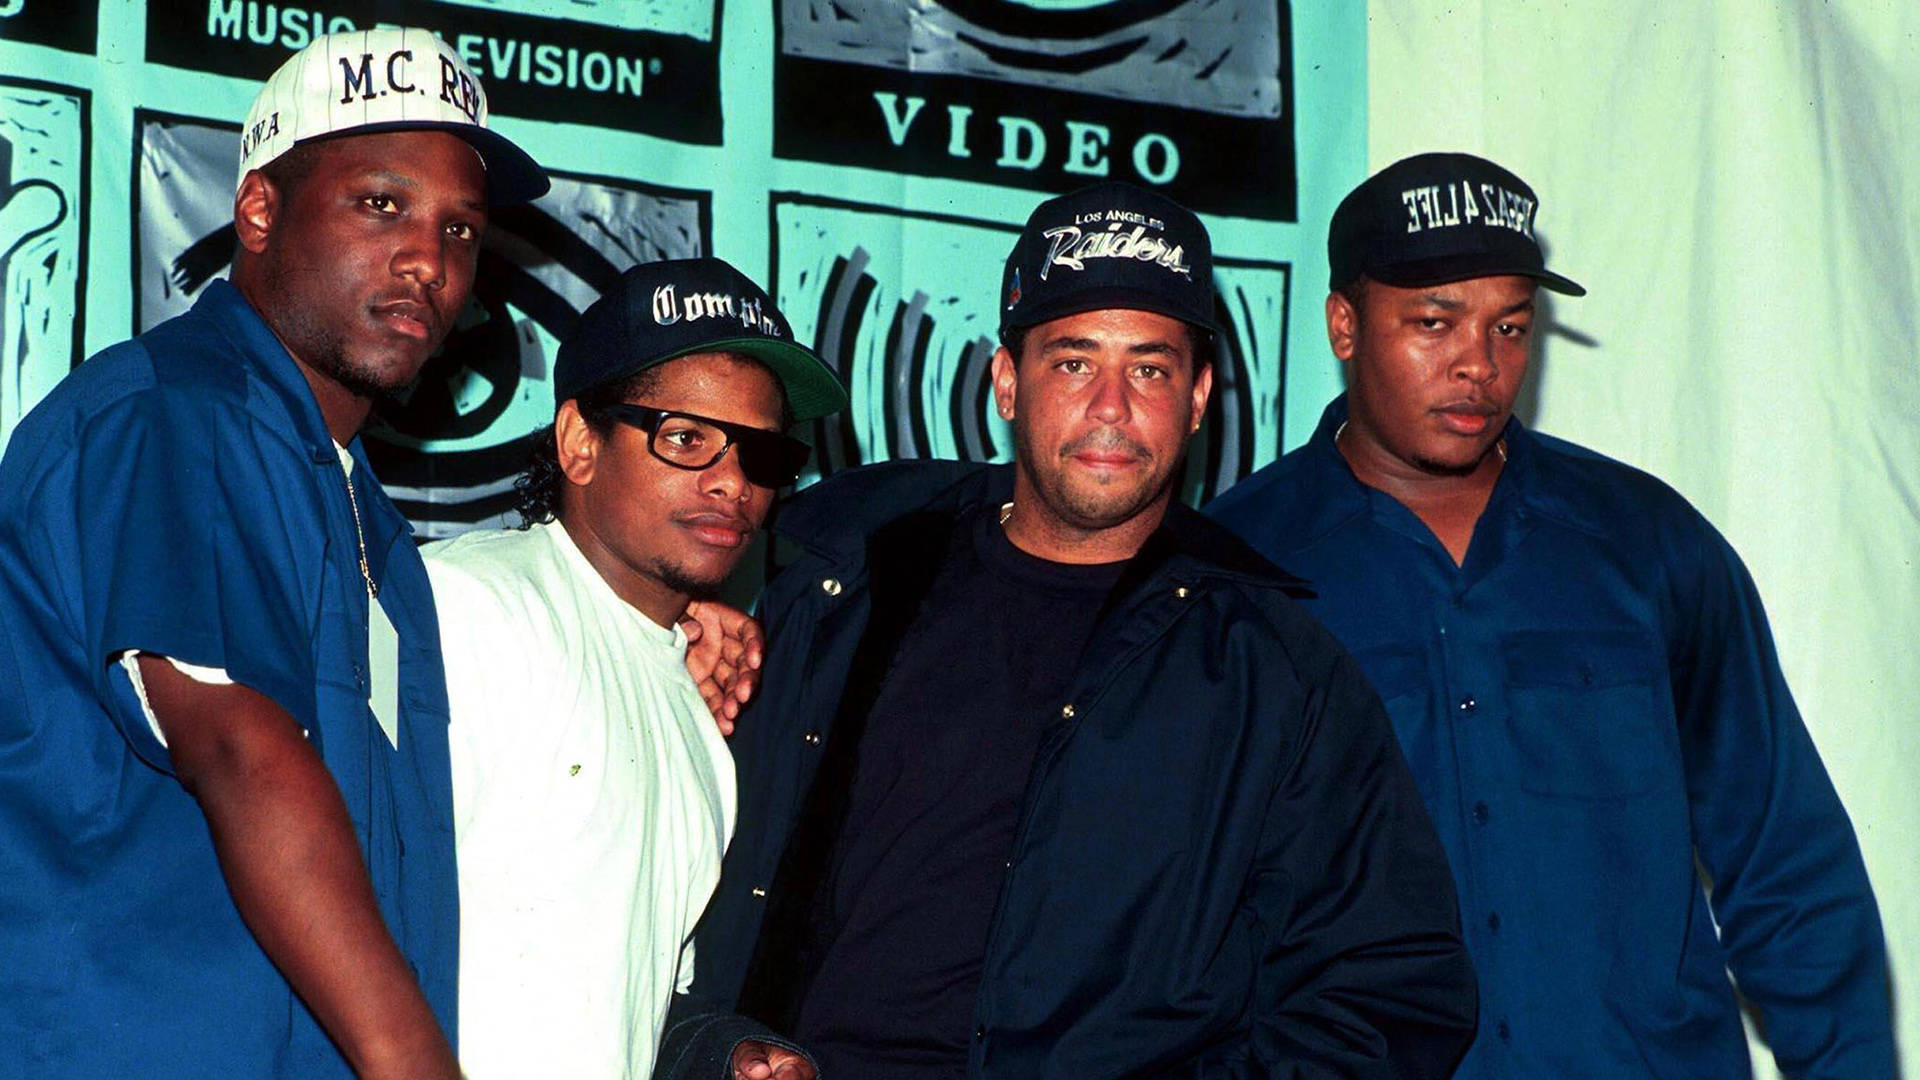 Nw.a. Rappers 1991 Mtv Video Music Awards - Rappers N.w.a. Na Premiação Mtv Video Music Awards De 1991. Papel de Parede